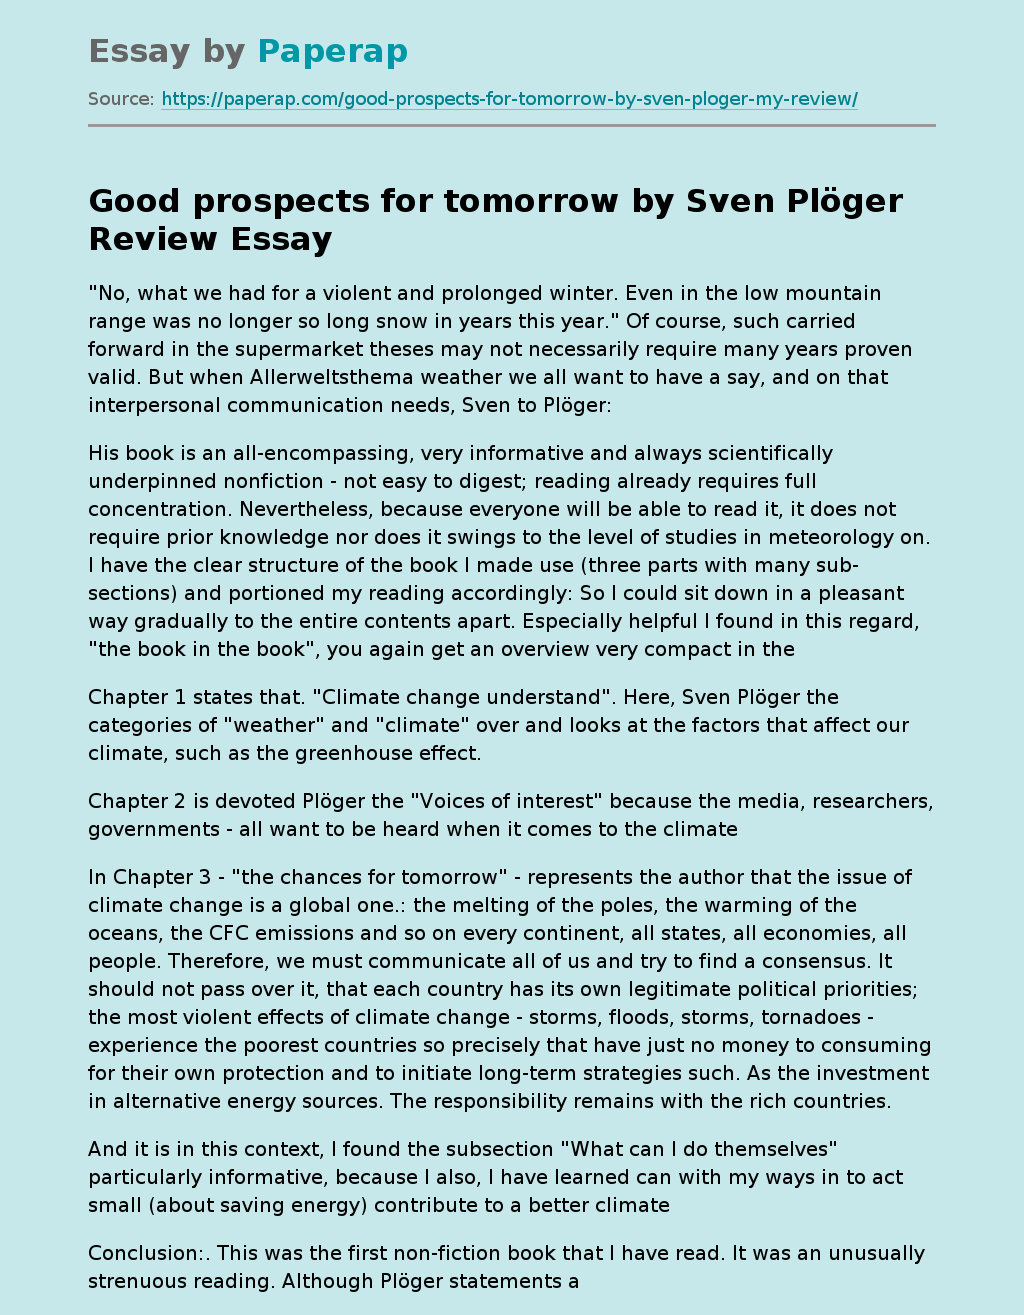 Good prospects for tomorrow by Sven Plöger Review